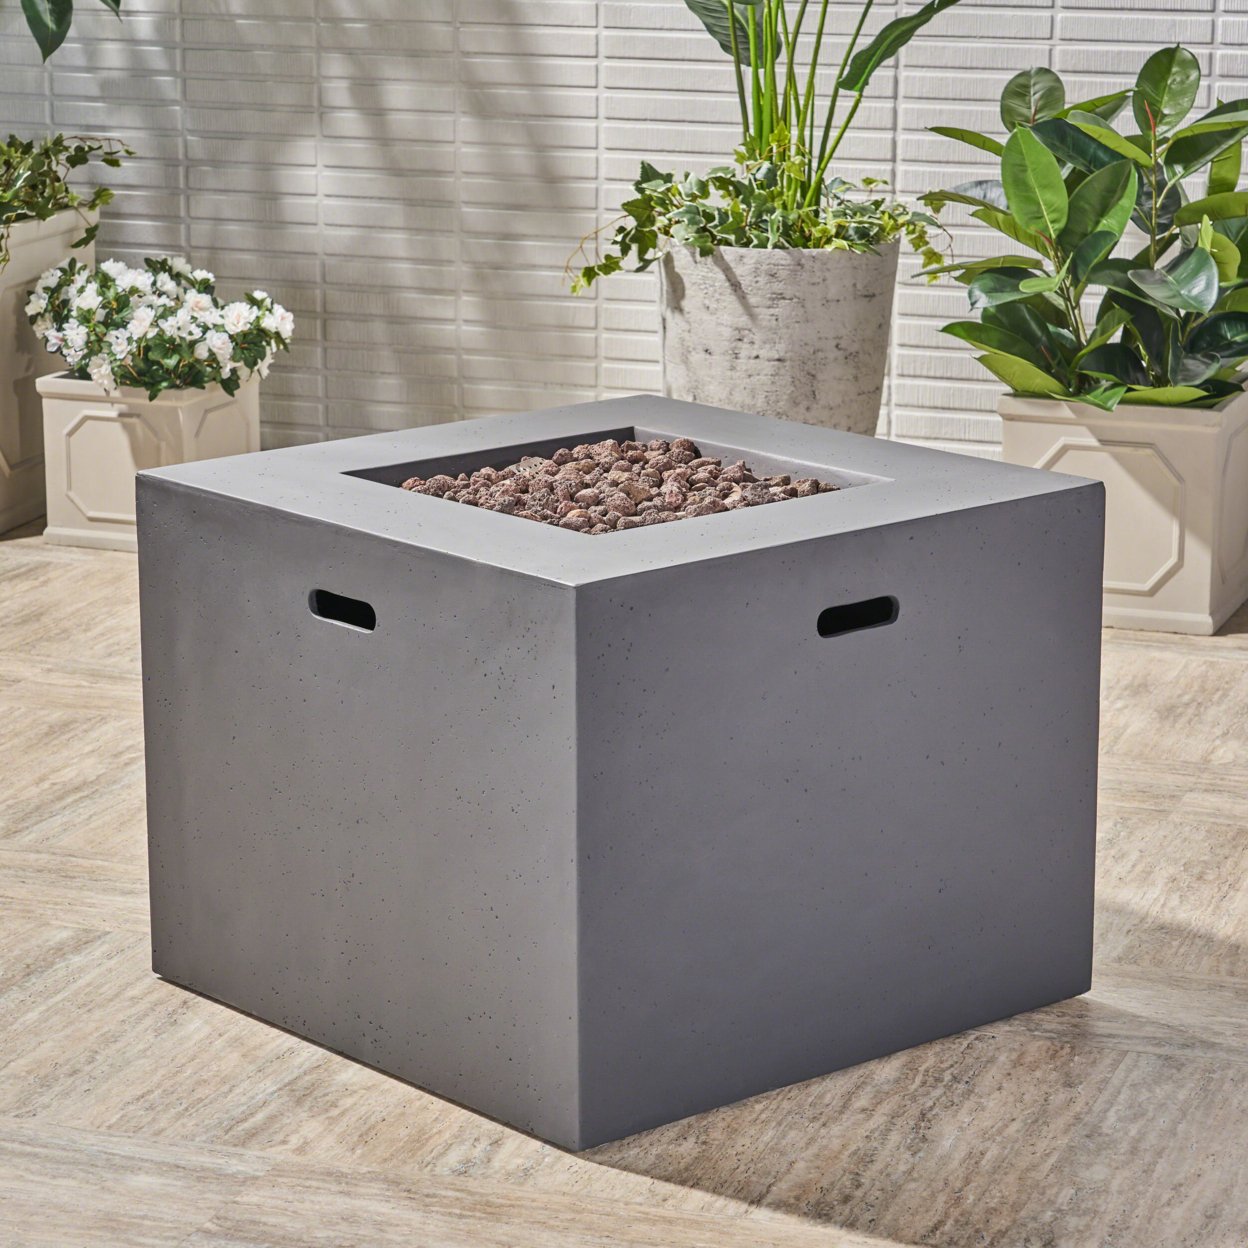 Leo Outdoor 31-inch Square Light Weight Concrete Gas Burning Fire Pit - Light Gray